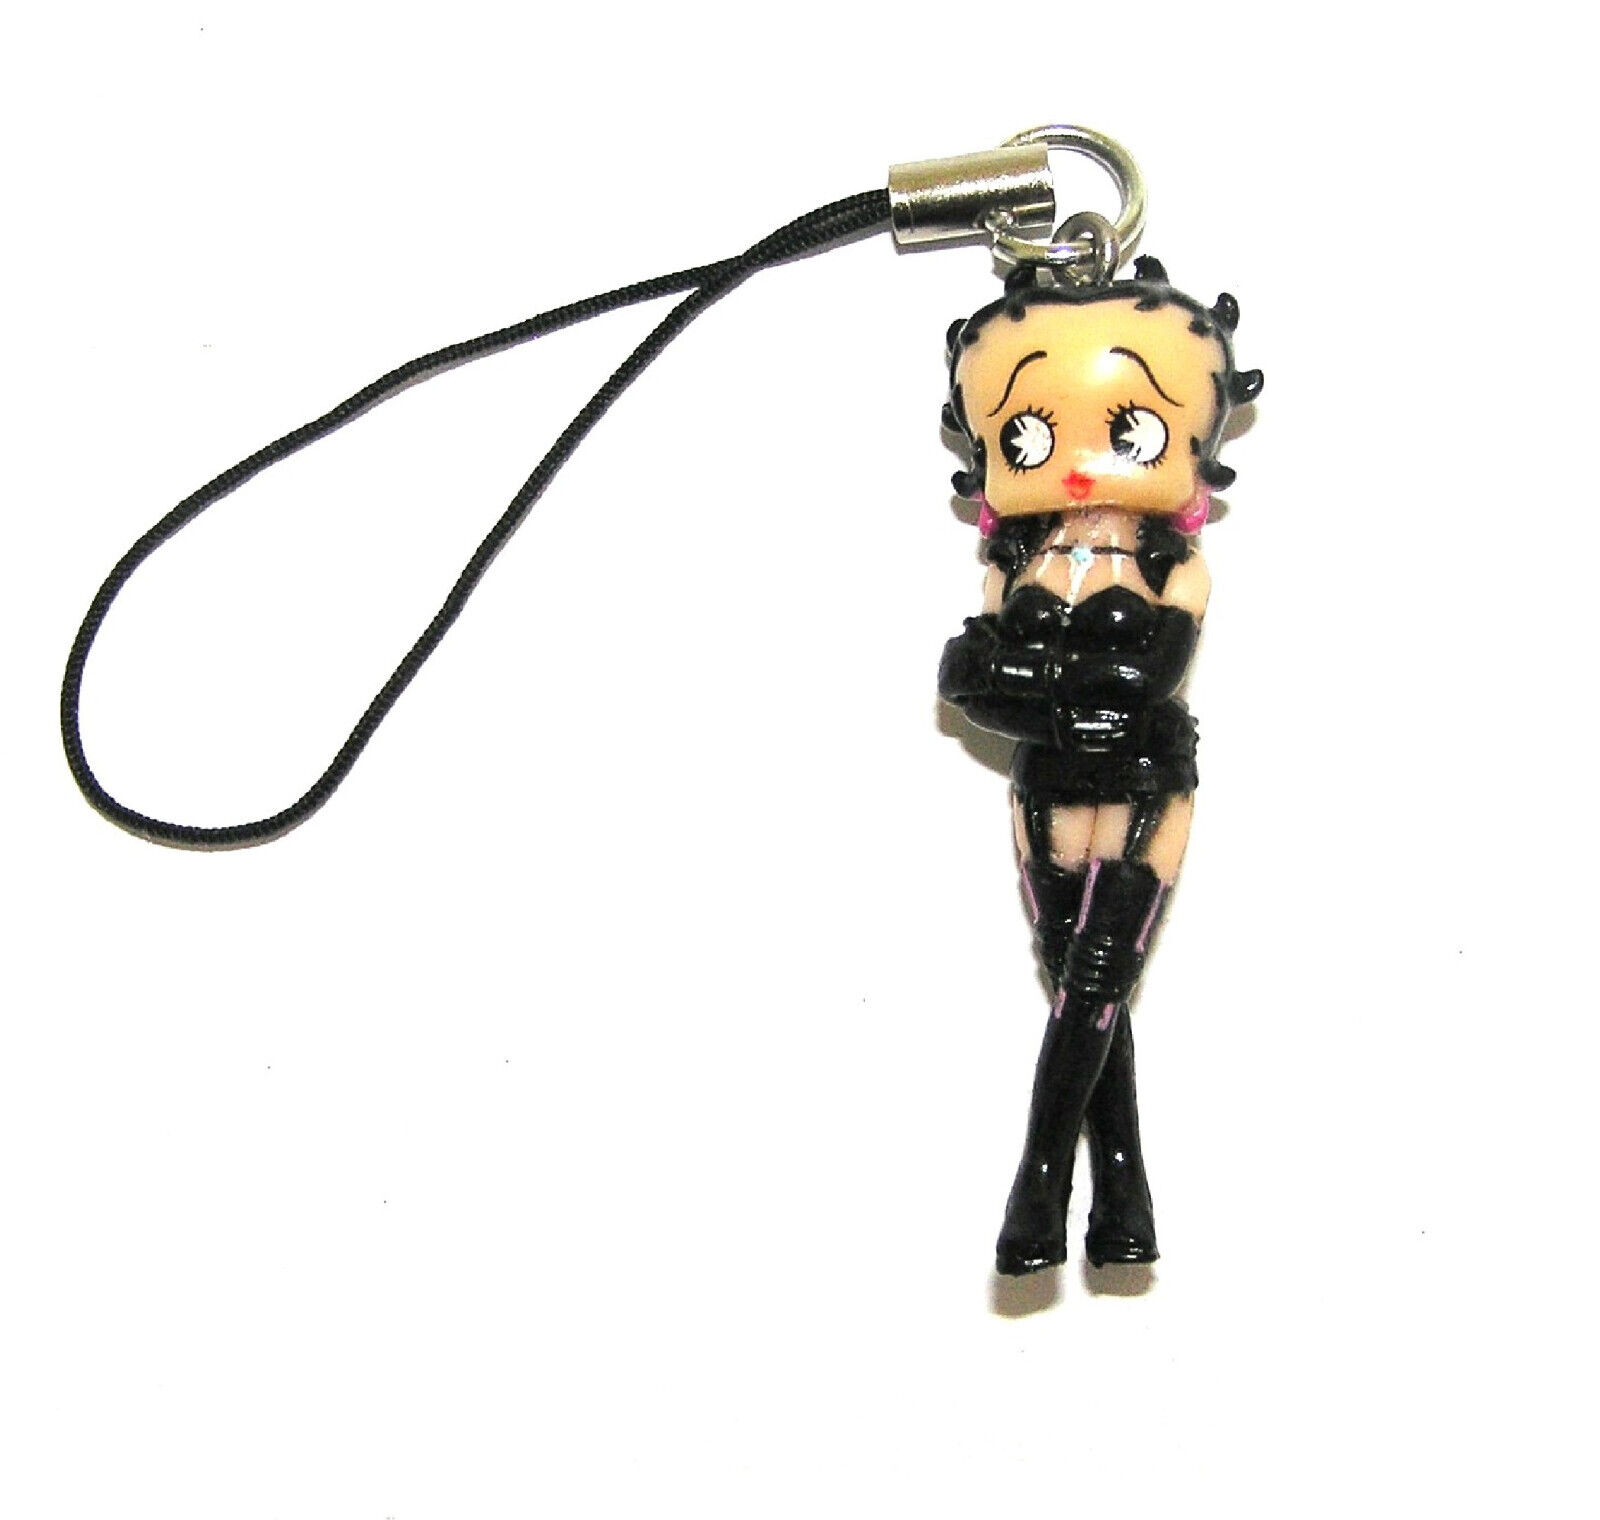 BETTY BOOP Charm For Cell Phone/Purse, In Spicy Black Corset, Boots, Suspenders